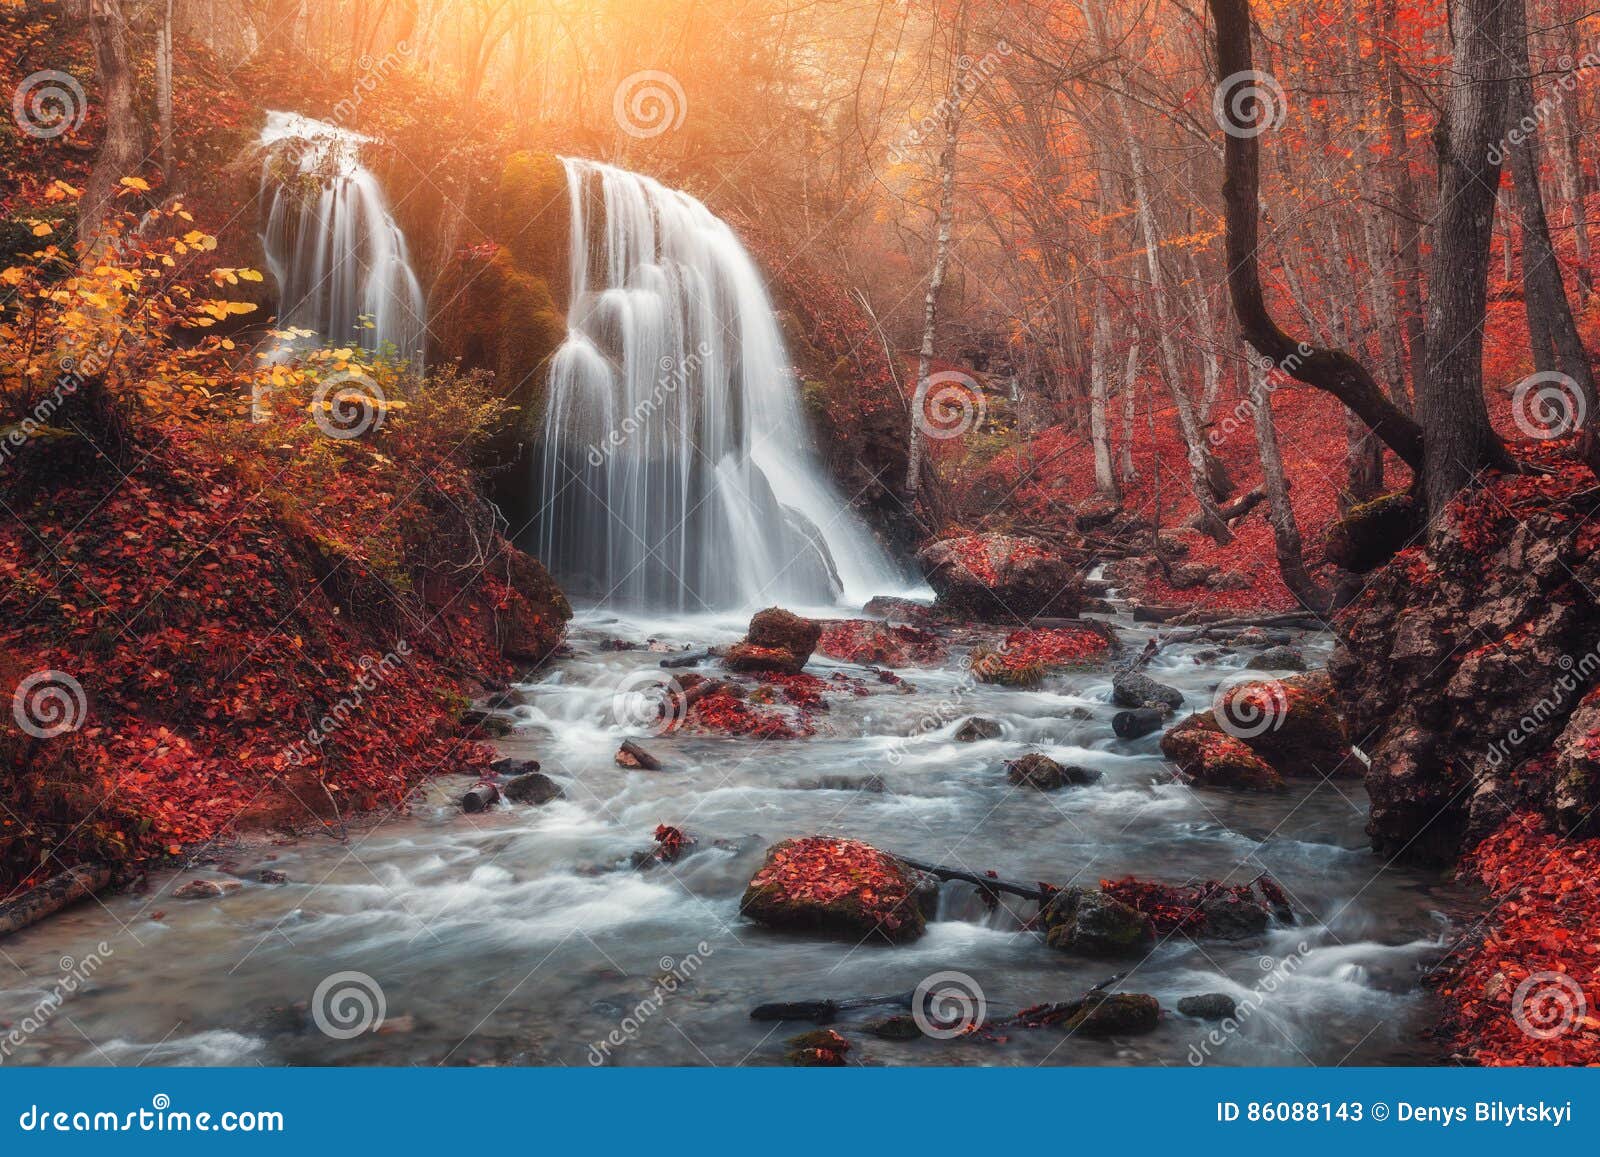 waterfall at mountain river in autumn forest at sunset